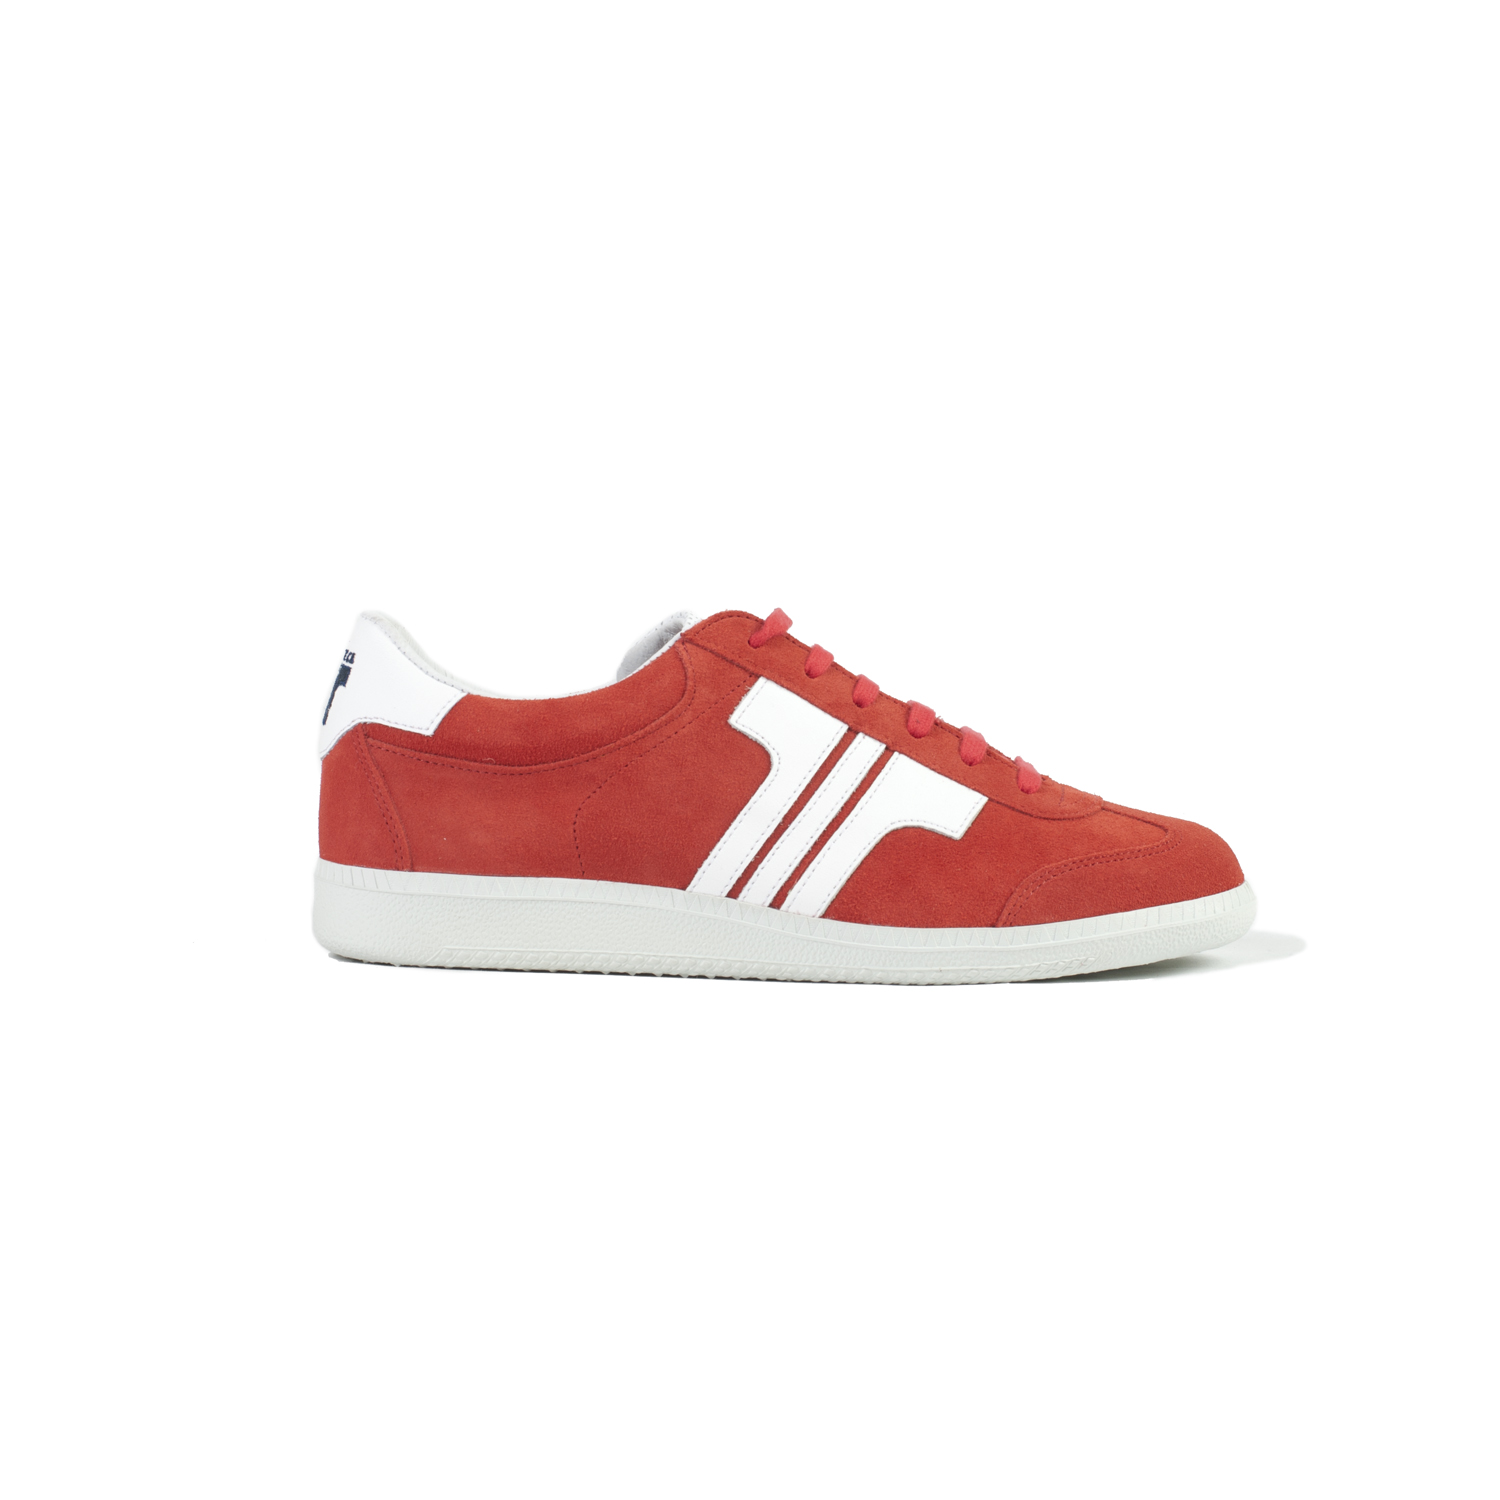 Tisza shoes - Comfort - Red zone